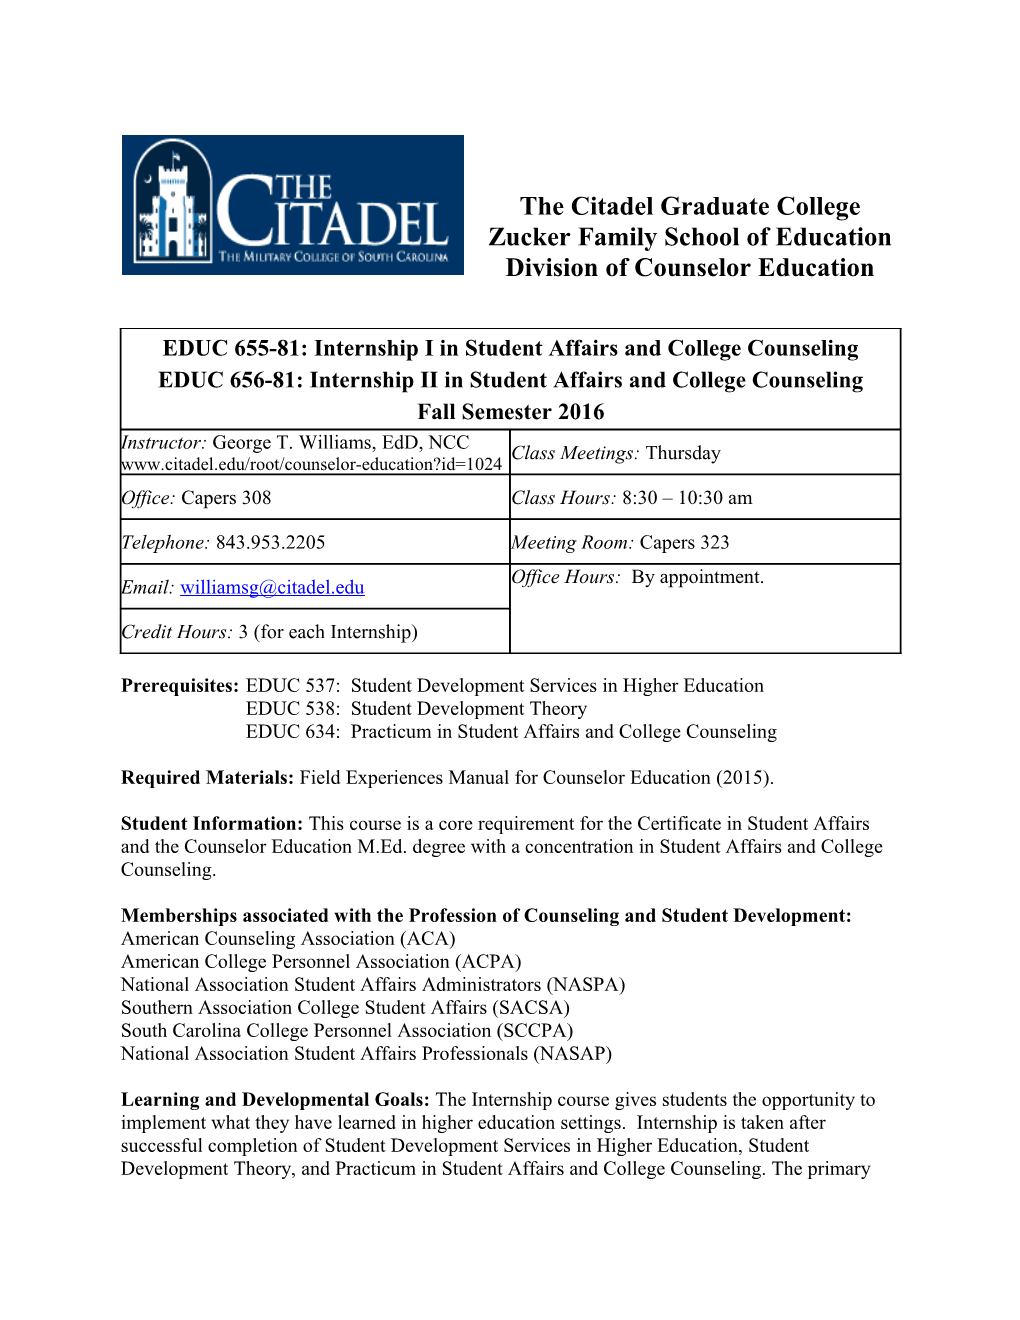 EDUC 655/656: Internship I and II in Student Affairs and College Counseling